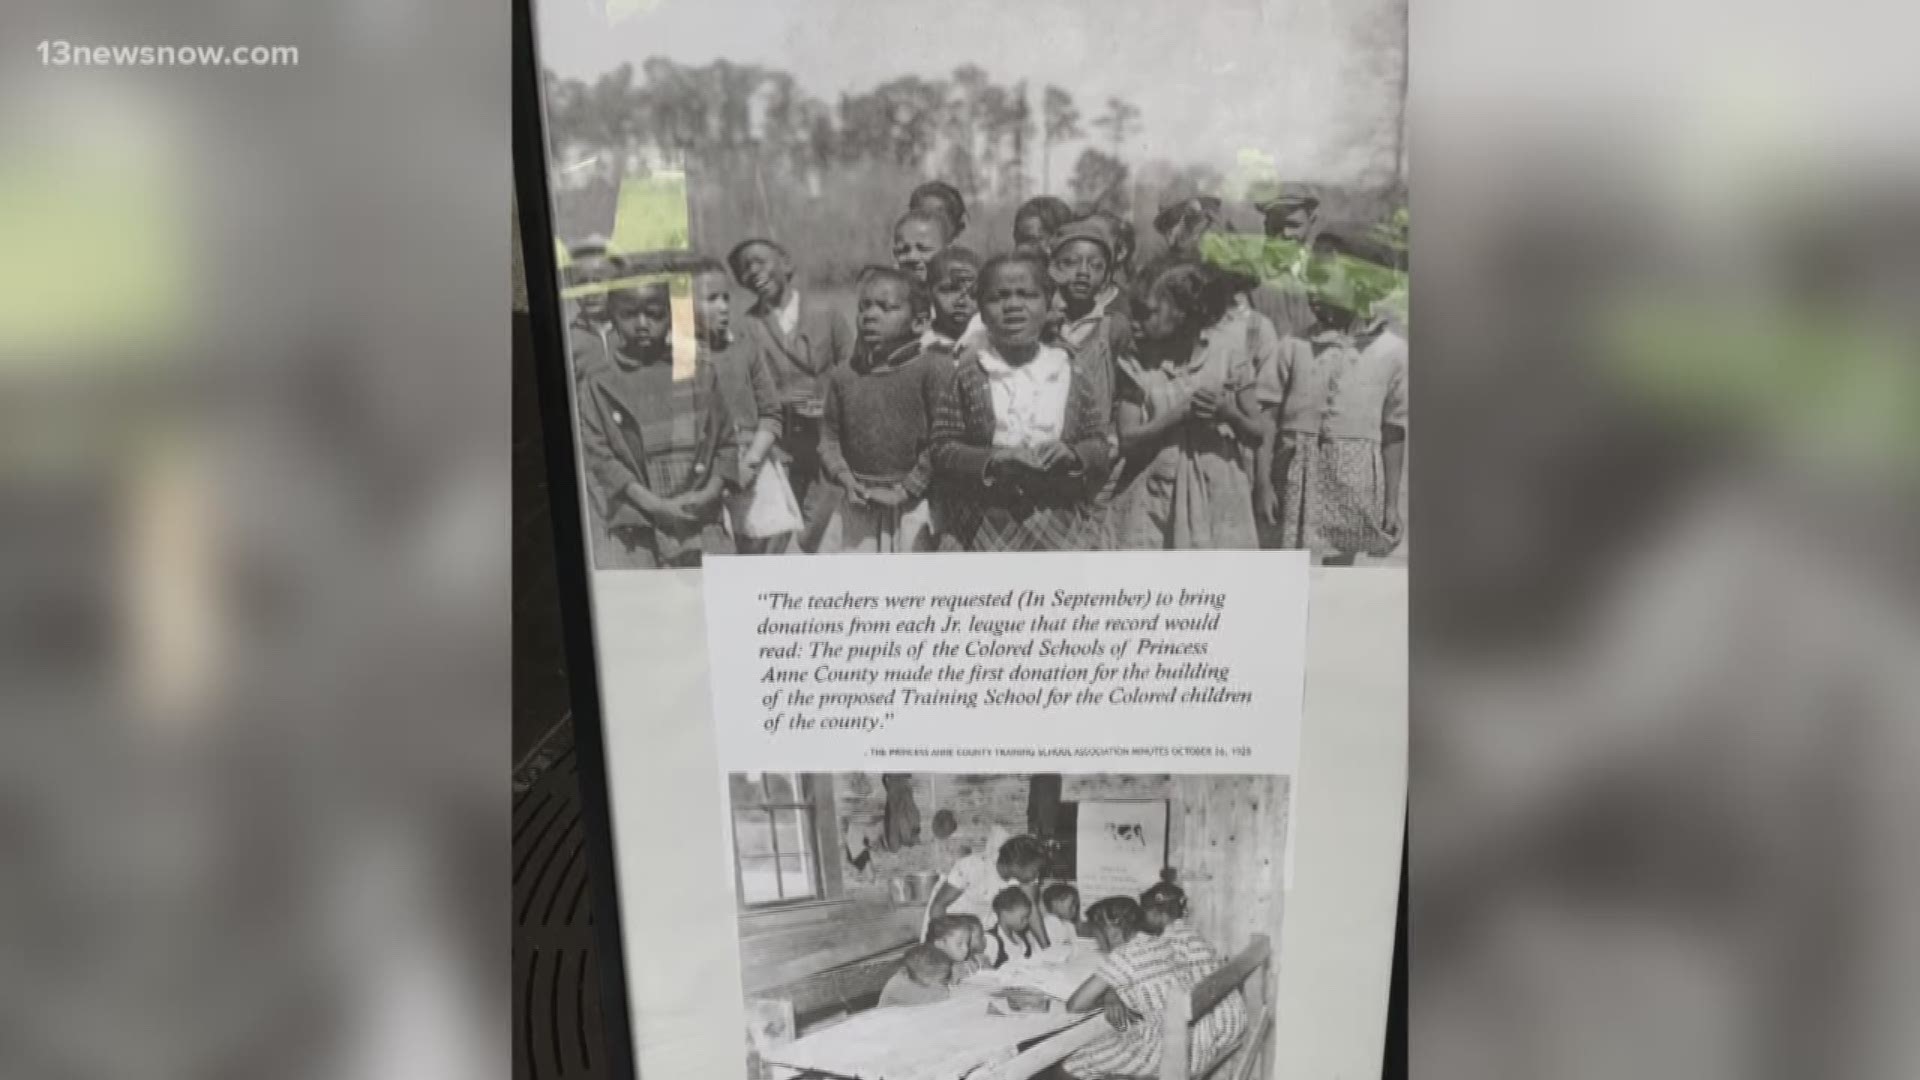 The exhibit features artist Richard Hollant’s photos of prominent residents of Virginia Beach's African American historic neighborhoods and video interviews.